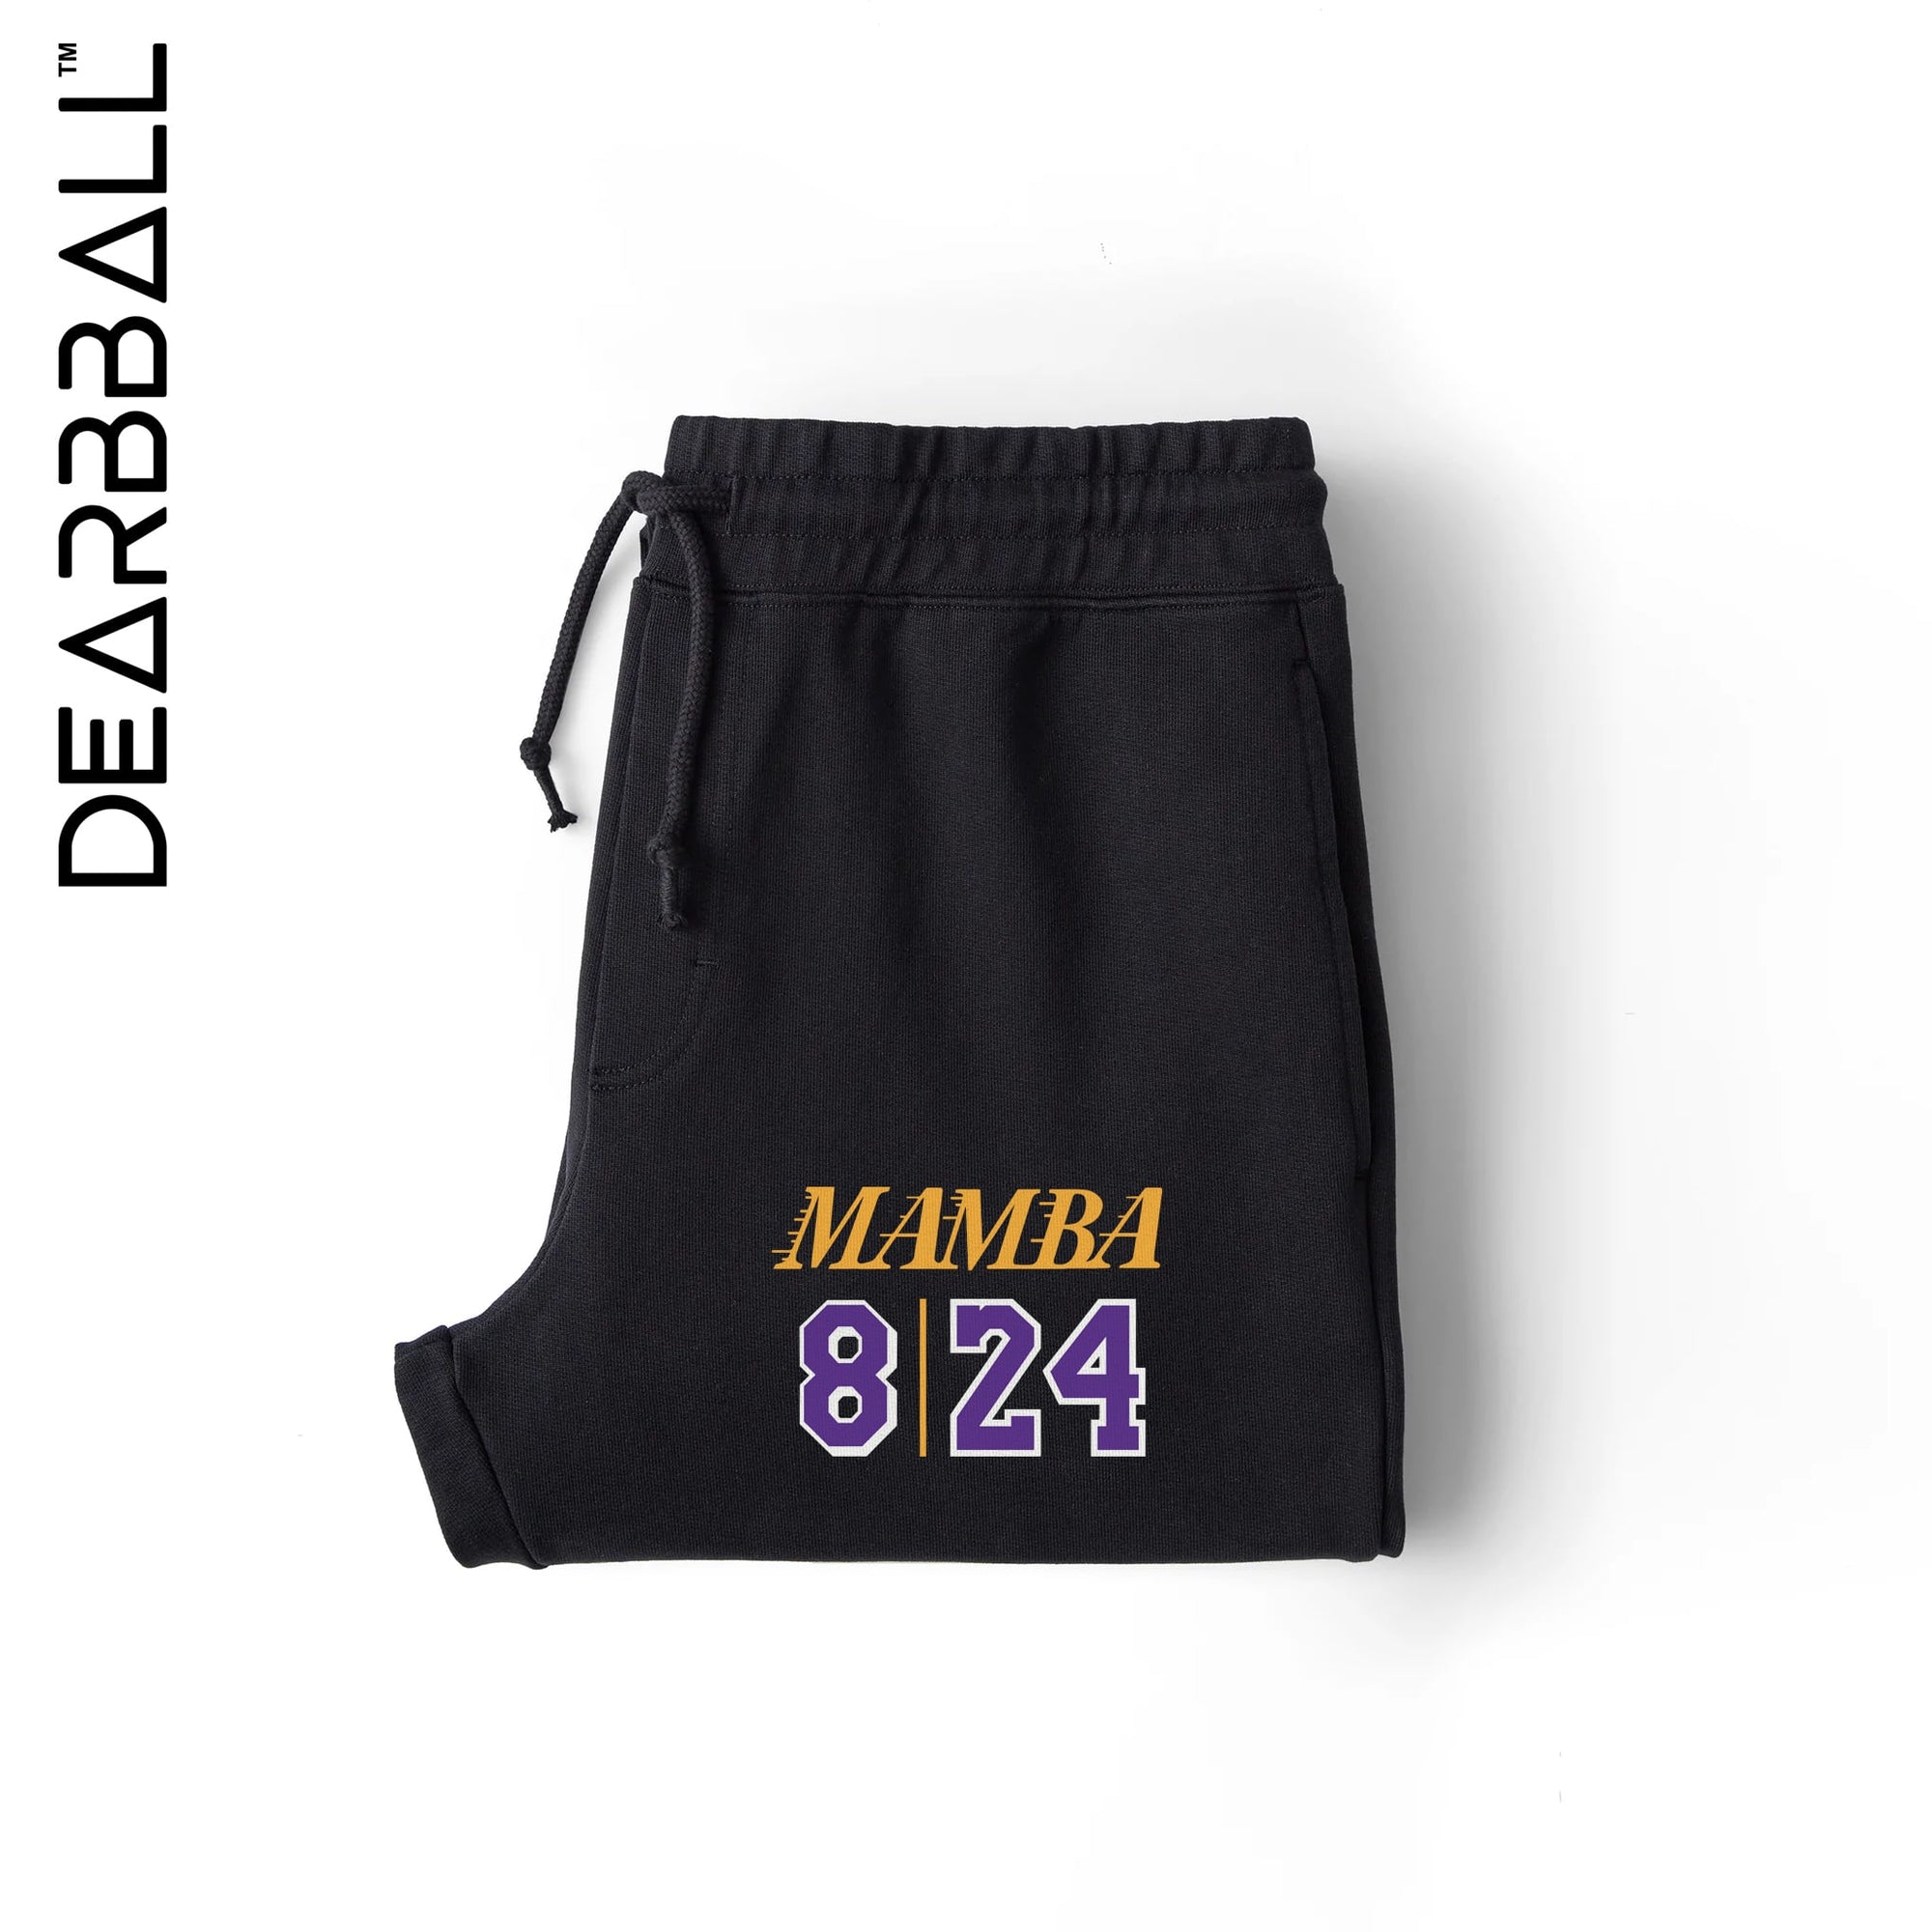 Jogging-Kobe-Bryant-Los-Angeles-Lakers-Dearbball-vetements-marque-france